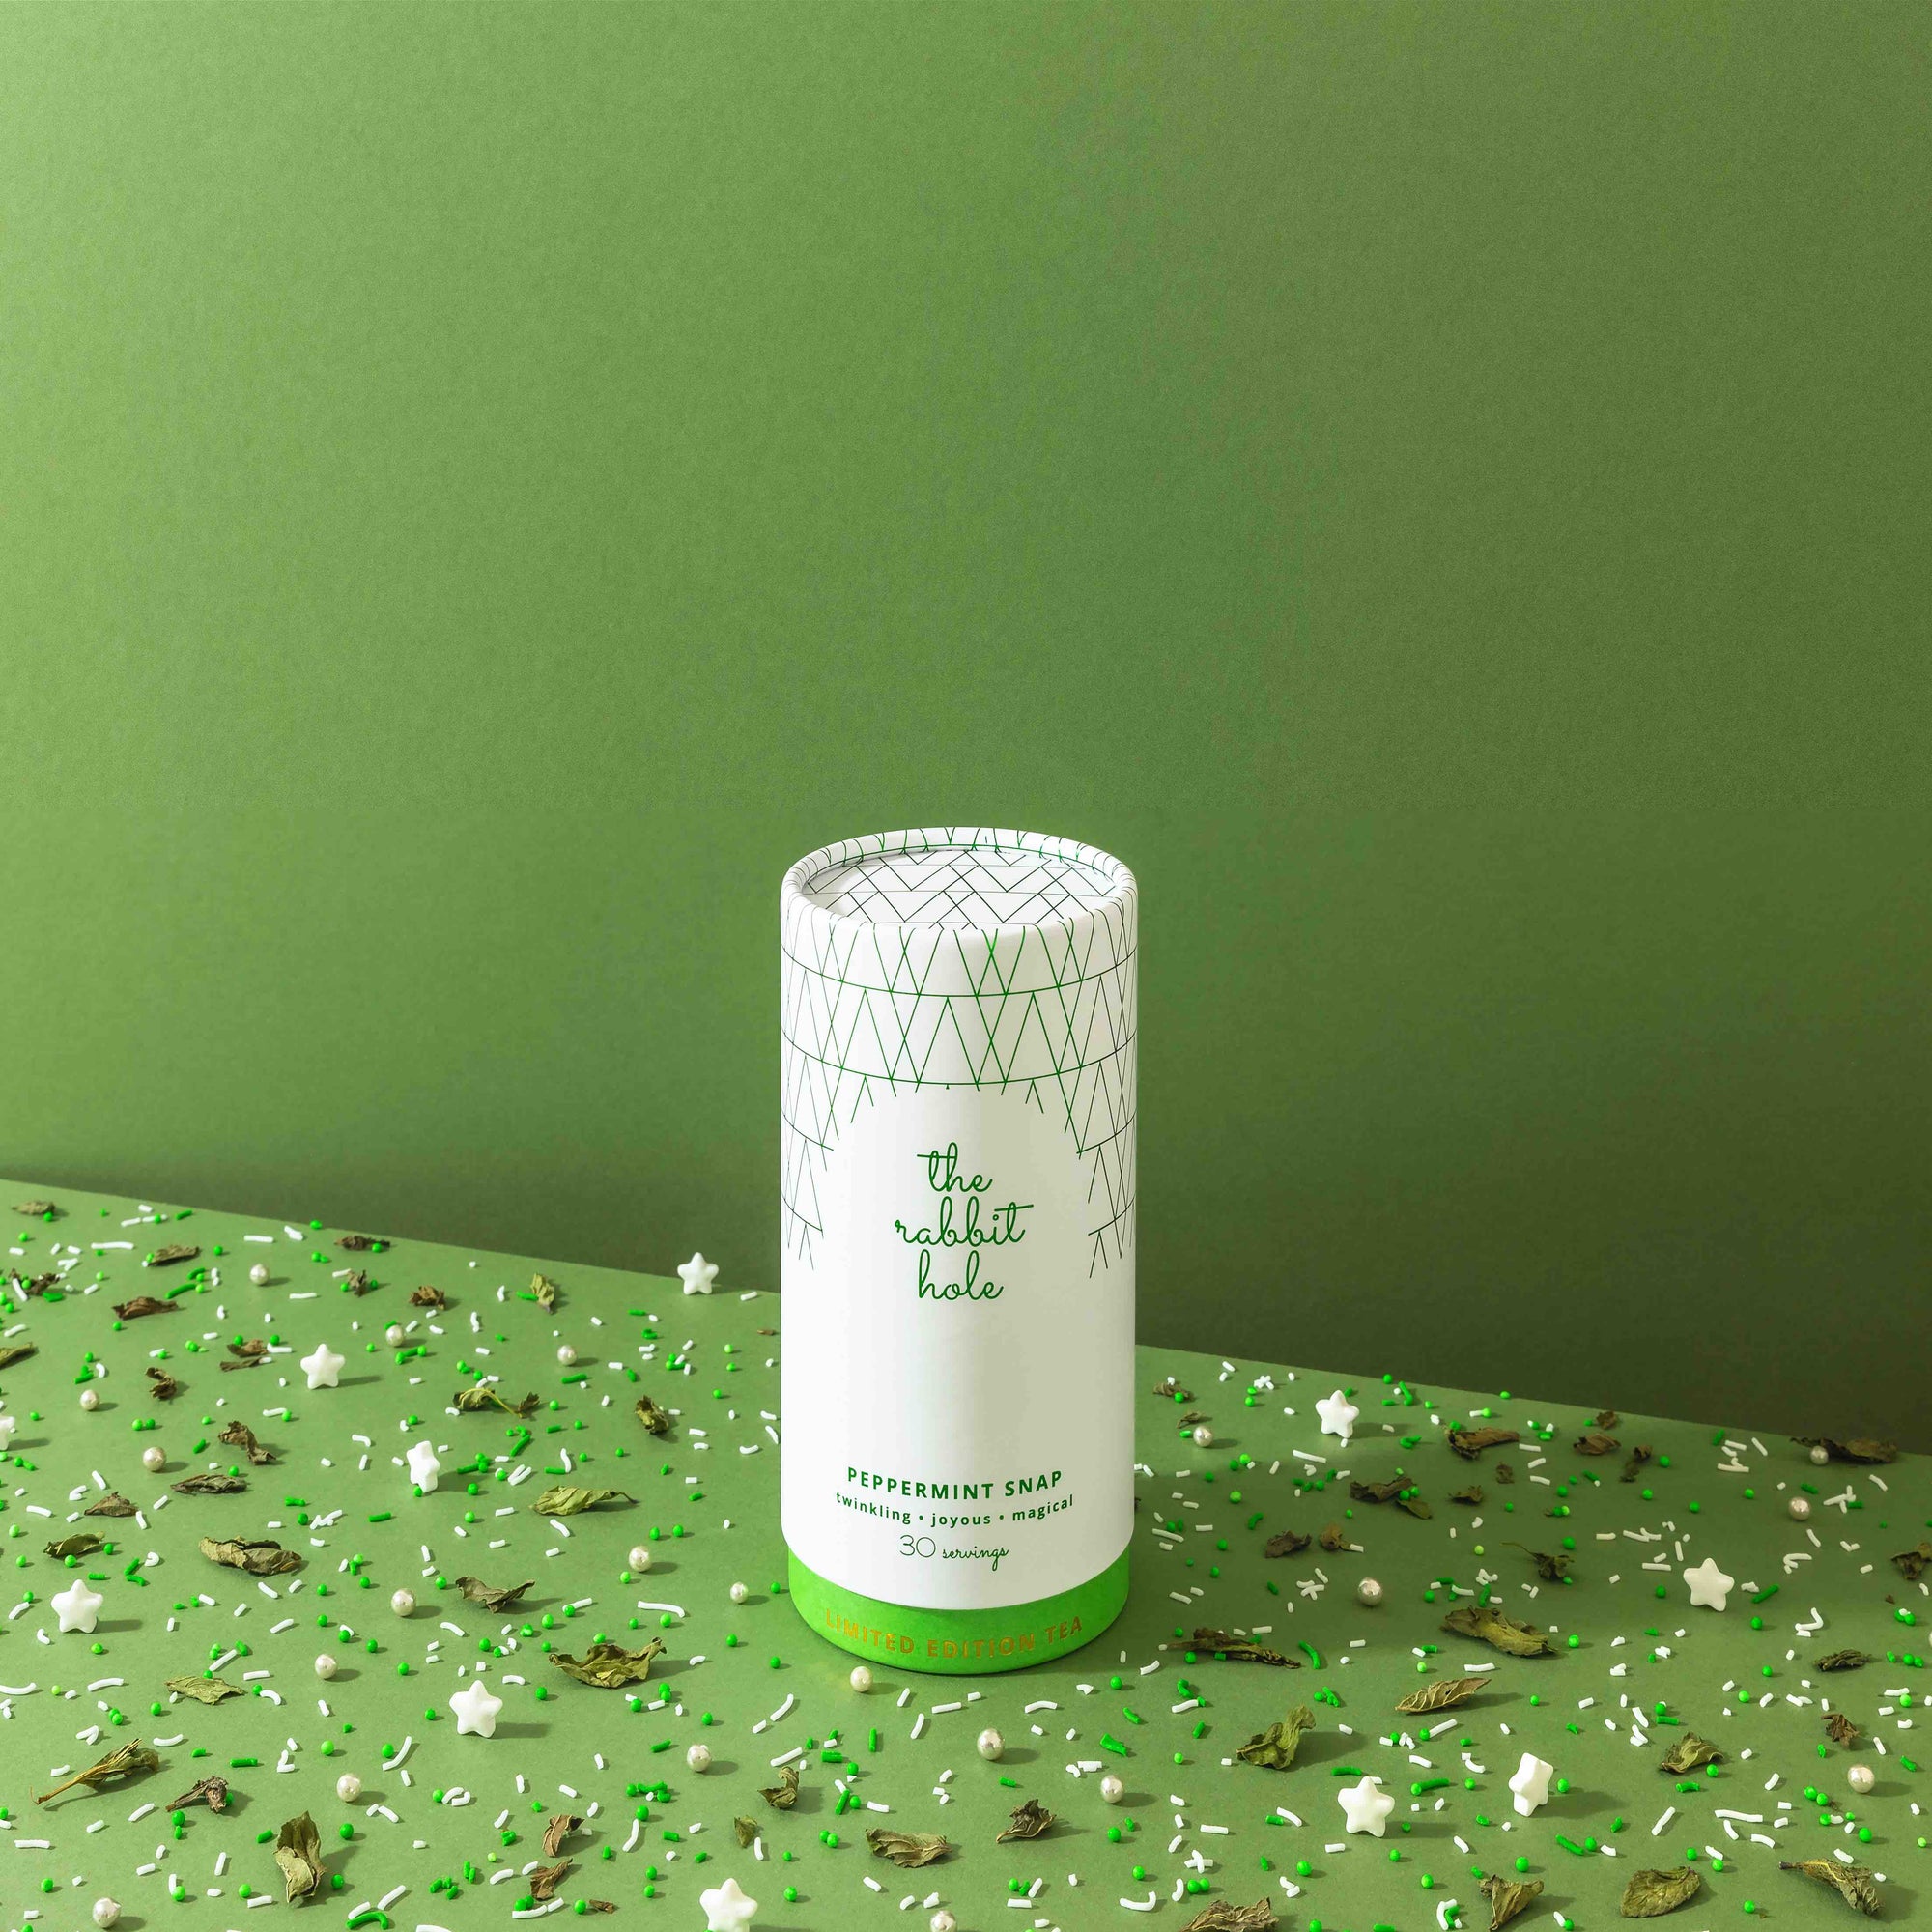 Peppermint Snap Christmas Tea with sparkles by The Rabbit Hole - canister on a bright green background with sprinkles.